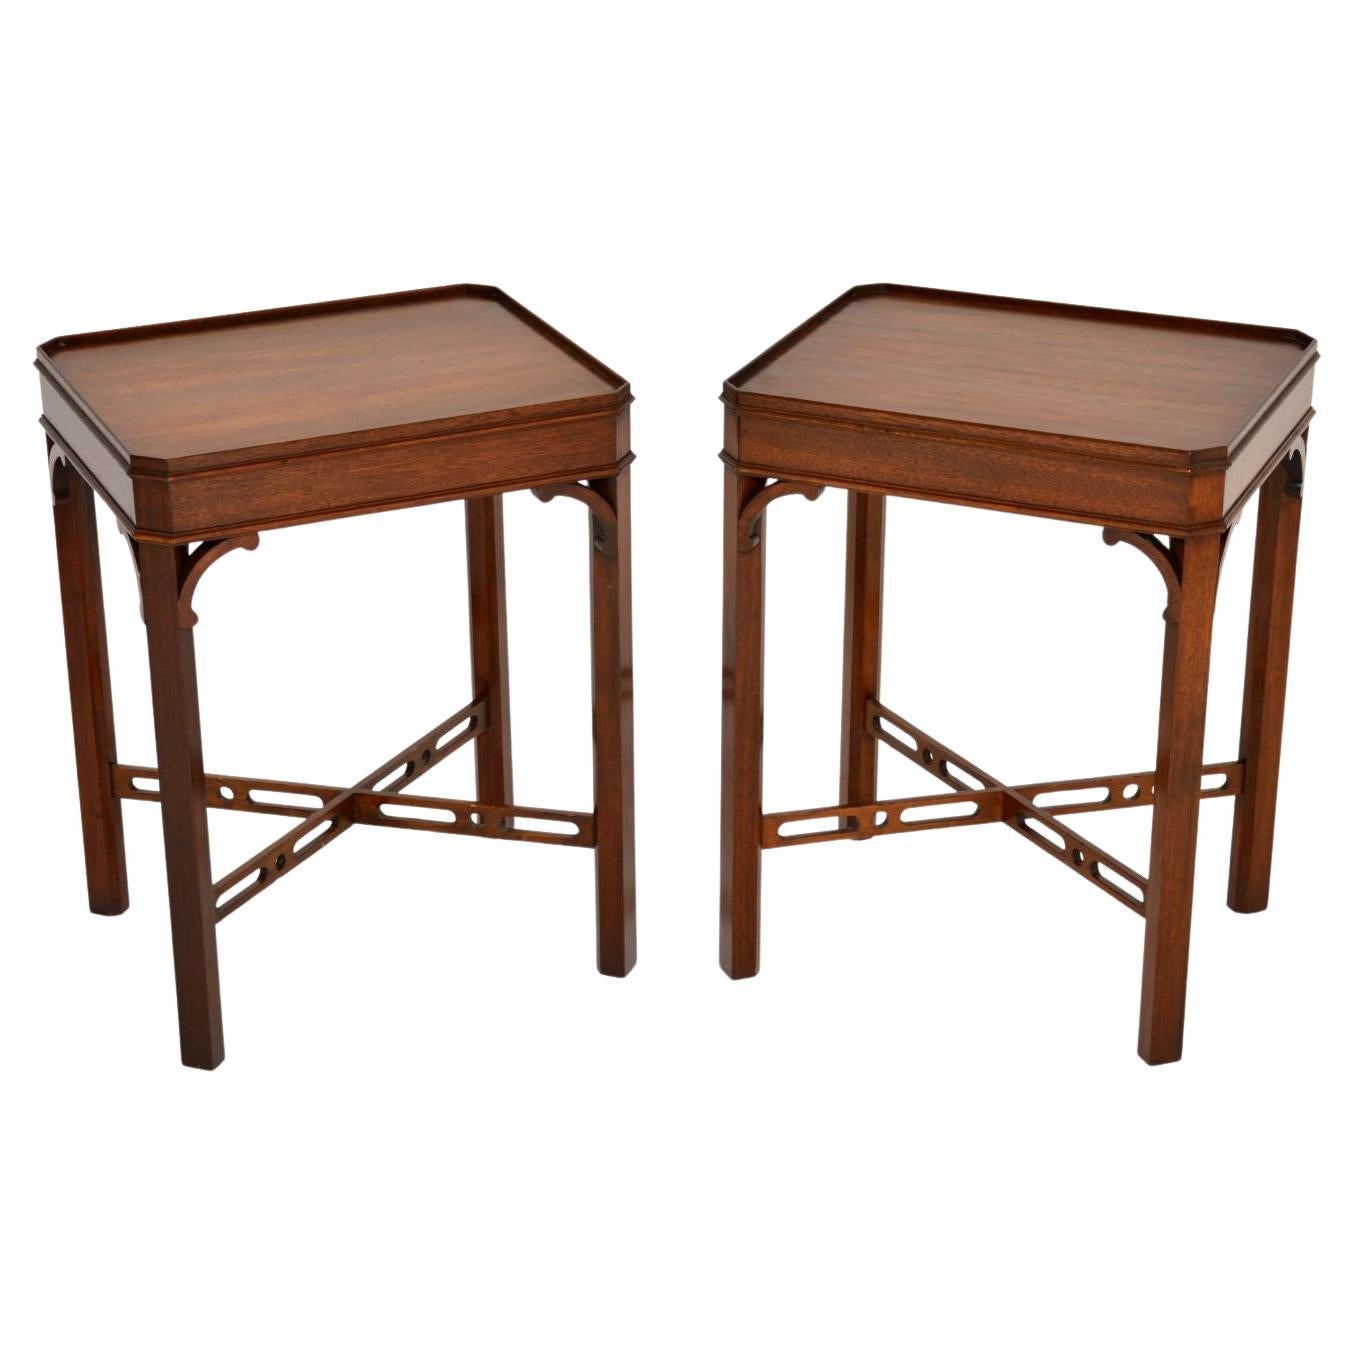 Pair of Antique Chippendale Style Side Tables